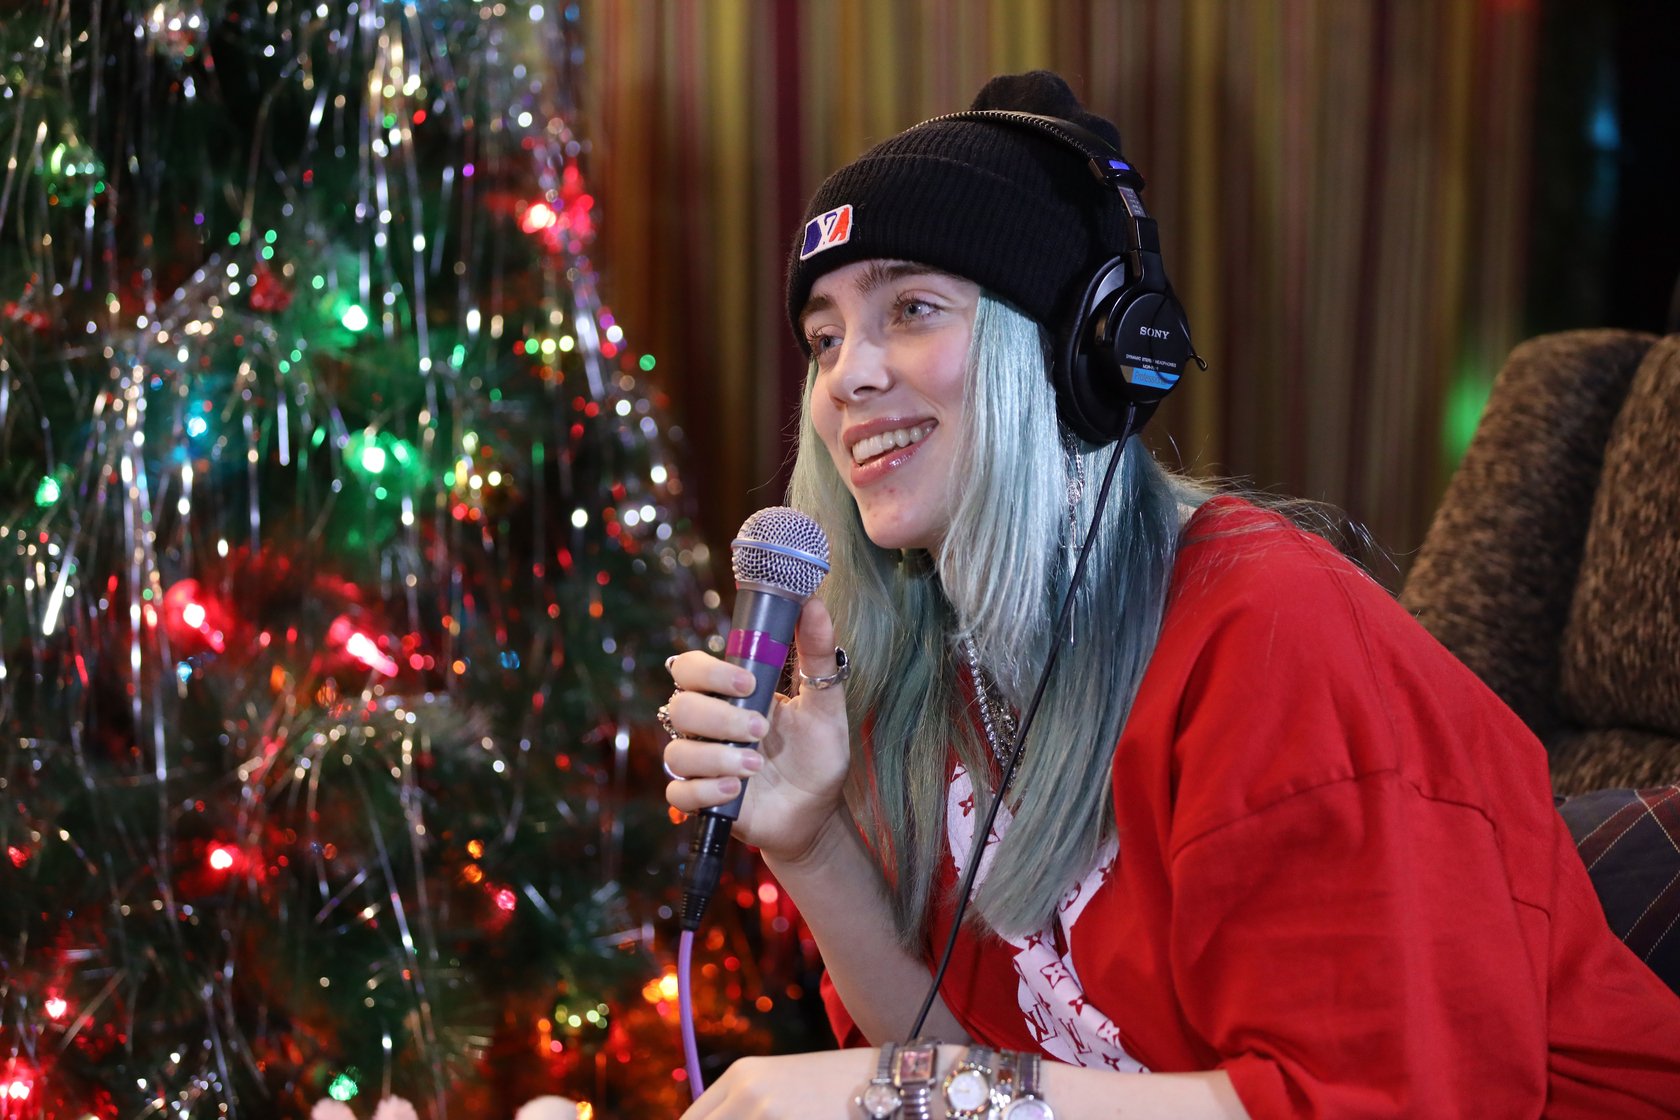  Billie Eilish speaks during an interview at KROQ Absolut Almost Acoustic Christmas at The Forum on December 9, 2018 in Inglewood, California | Photo: GettyImages